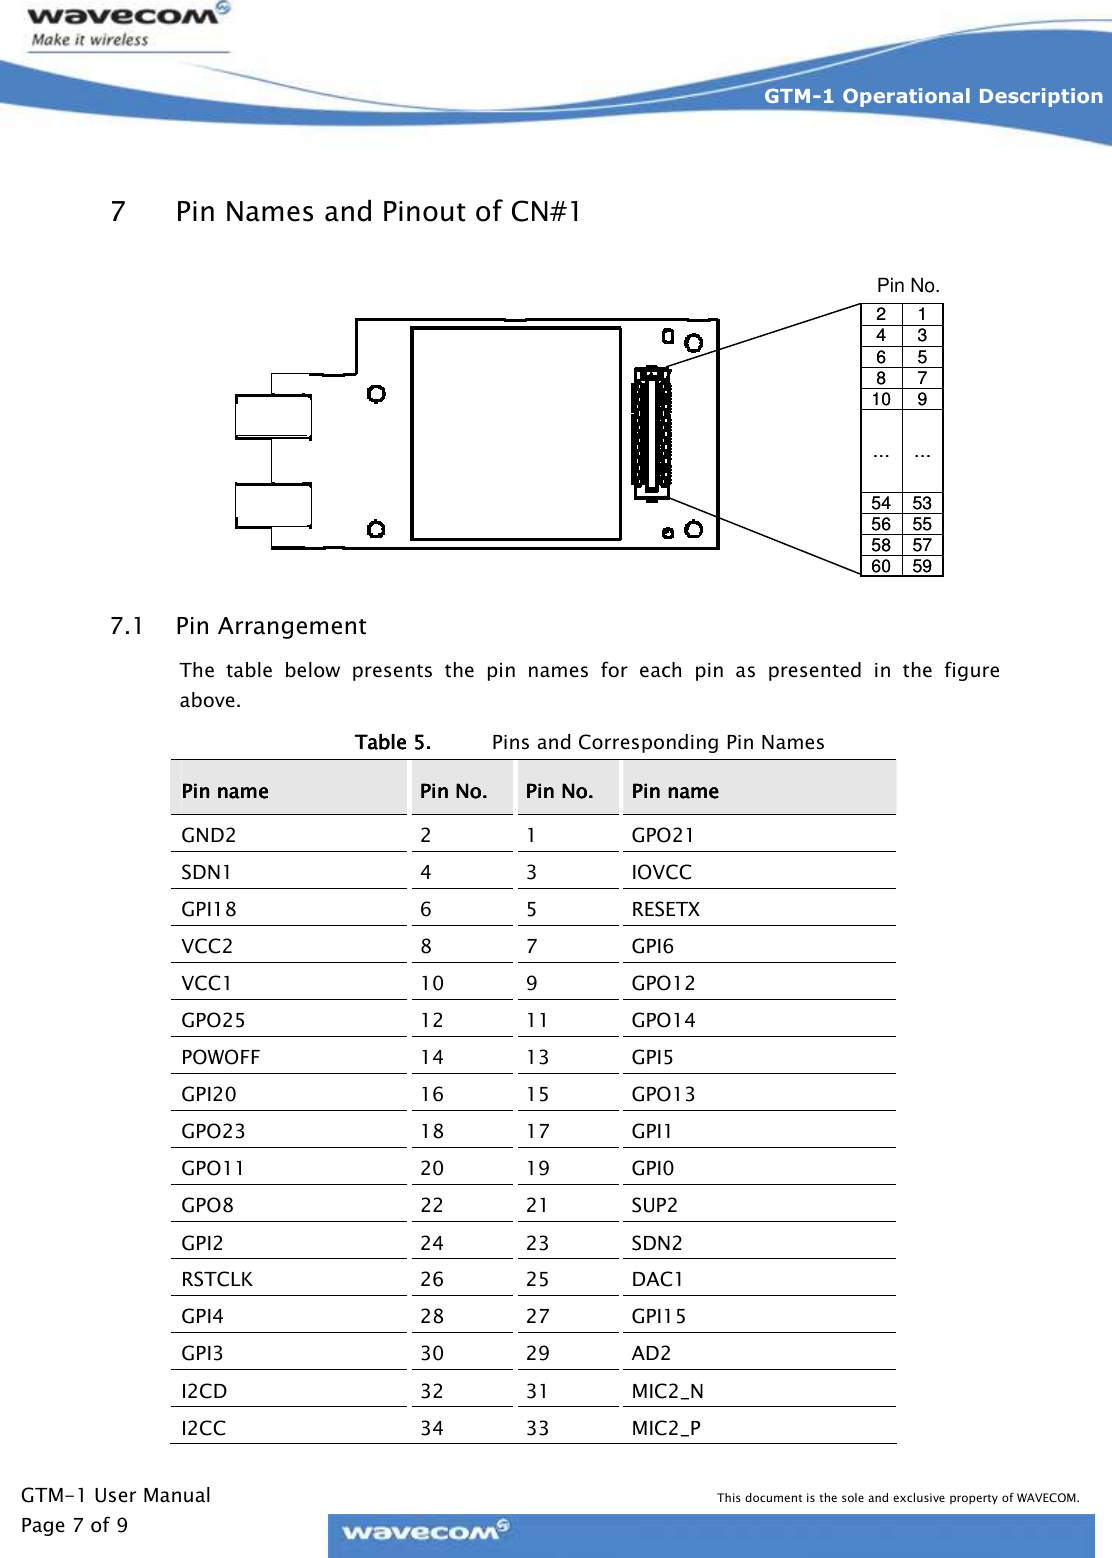   GTM-1 User Manual This document is the sole and exclusive property of WAVECOM. Page 7 of 9 GTM-1 Operational Description    7 Pin Names and Pinout of CN#1 7.1 Pin Arrangement The  table  below  presents  the  pin  names  for  each  pin  as  presented  in  the  figure above. Table 5.Table 5.Table 5.Table 5. Pins and Corresponding Pin Names Pin namePin namePin namePin name     Pin No.Pin No.Pin No.Pin No.     Pin No.Pin No.Pin No.Pin No.     Pin namePin namePin namePin name    GND2  2  1  GPO21 SDN1  4  3  IOVCC GPI18  6  5  RESETX VCC2  8  7  GPI6 VCC1  10  9  GPO12 GPO25  12  11  GPO14 POWOFF  14  13  GPI5 GPI20  16  15  GPO13 GPO23  18  17  GPI1 GPO11  20  19  GPI0 GPO8  22  21  SUP2 GPI2  24  23  SDN2 RSTCLK  26  25  DAC1 GPI4  28  27  GPI15 GPI3  30  29  AD2 I2CD  32  31  MIC2_N I2CC  34  33  MIC2_P 5960 5758 5556 5354……910 78 56 34 125960 5758 5556 5354……910 78 56 34 12Pin No.